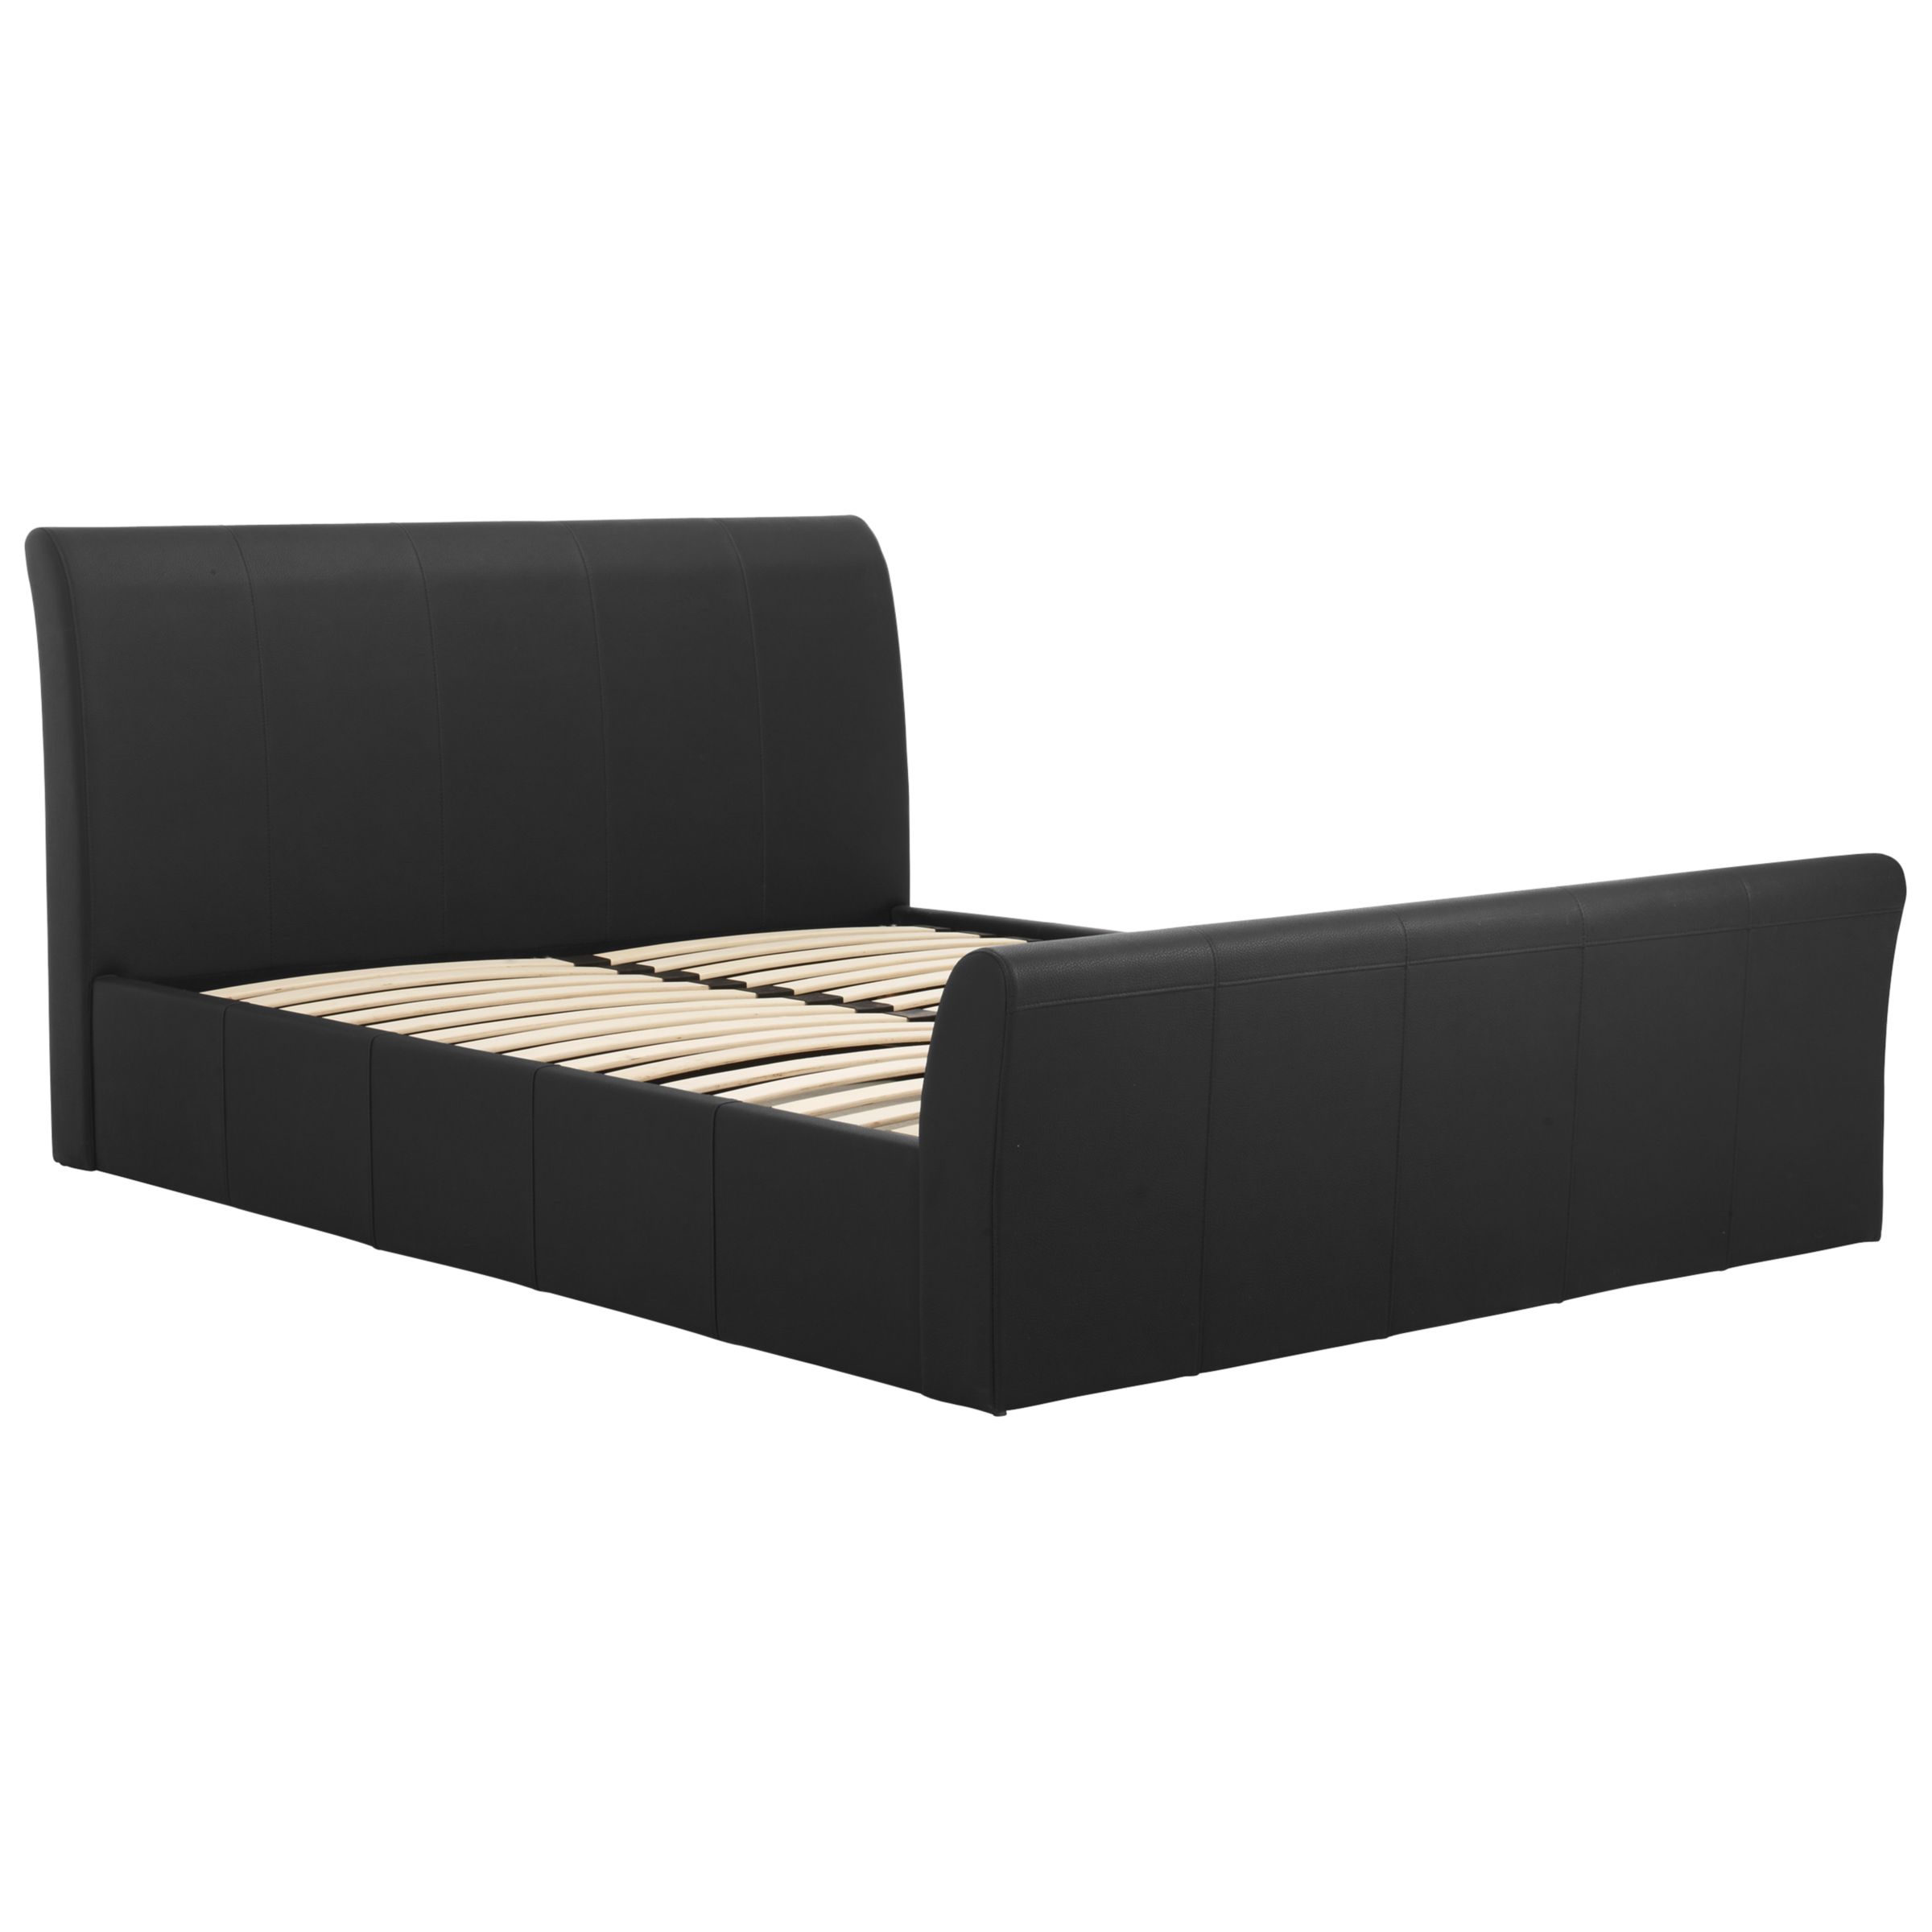 Chatham Ottoman Bedstead, Black, Double